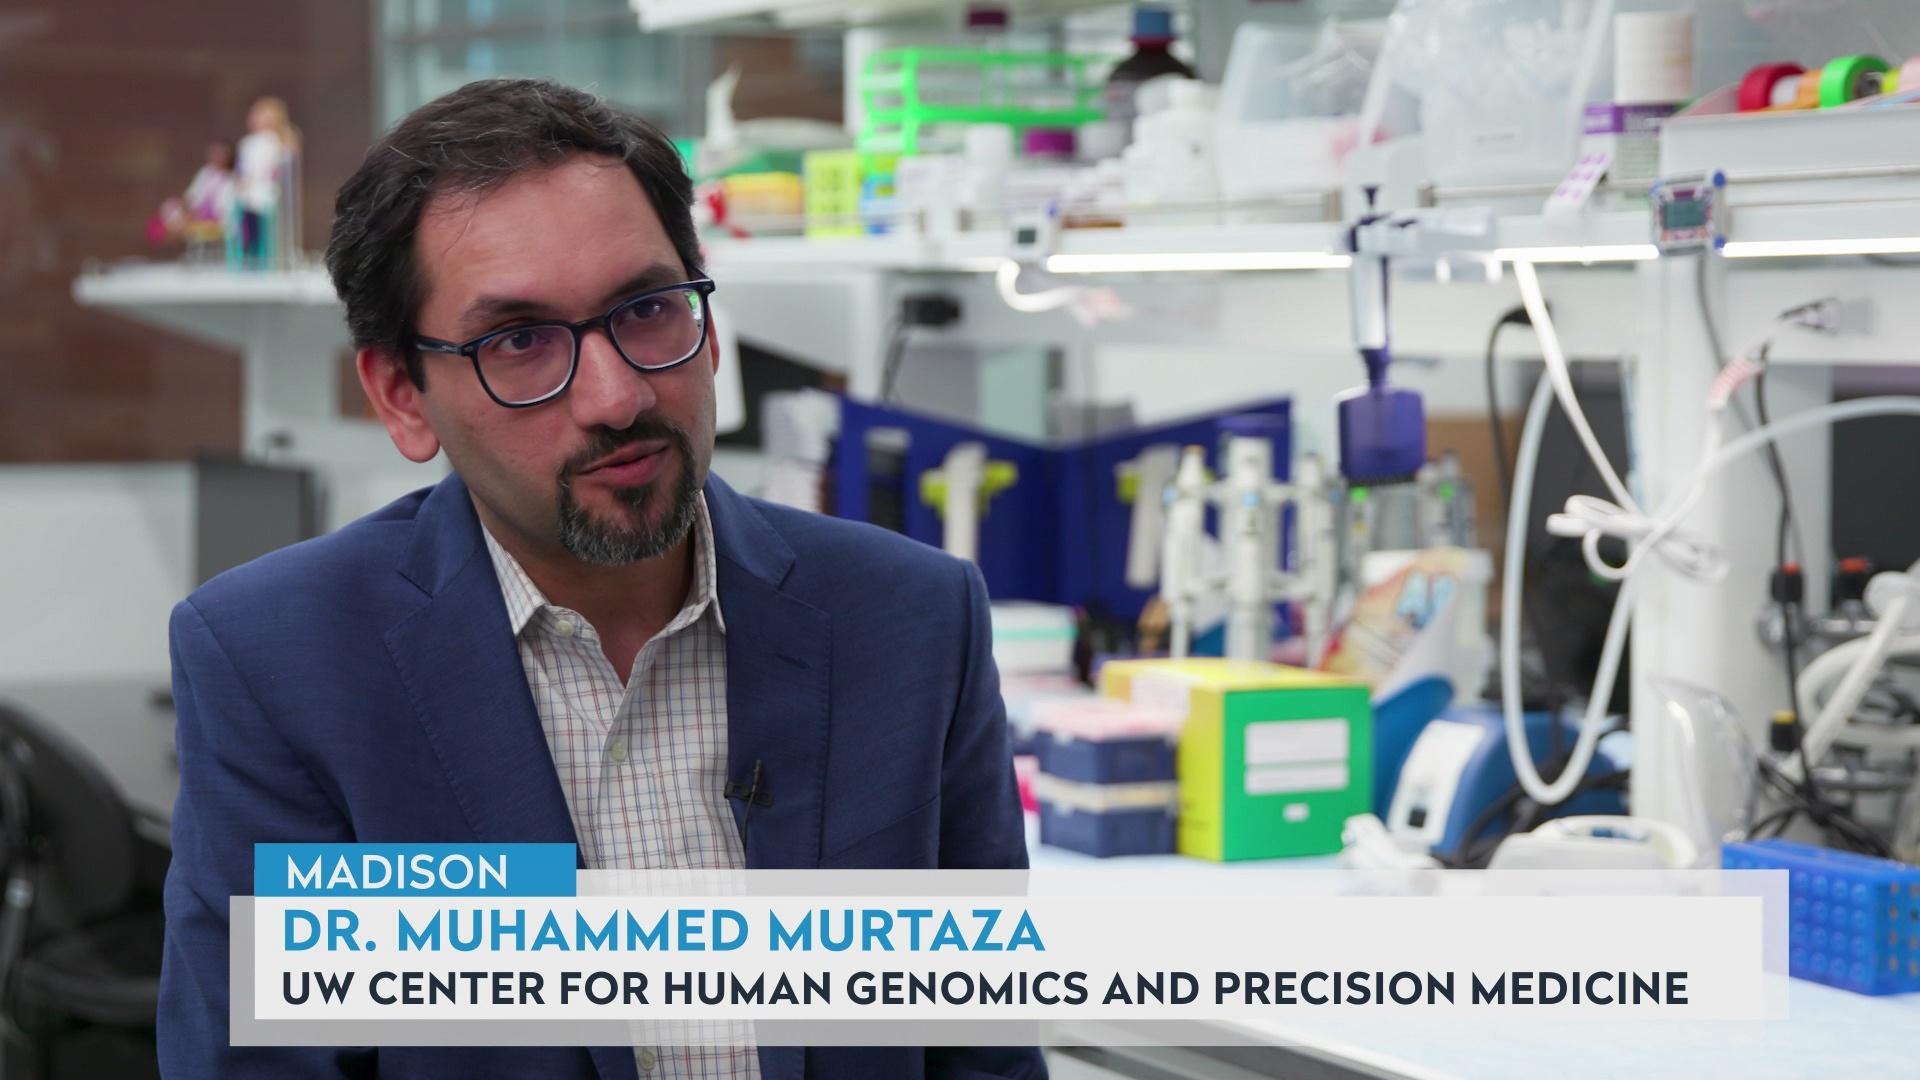 Dr. Muhammed Murtaza on cancer and personalized medicine